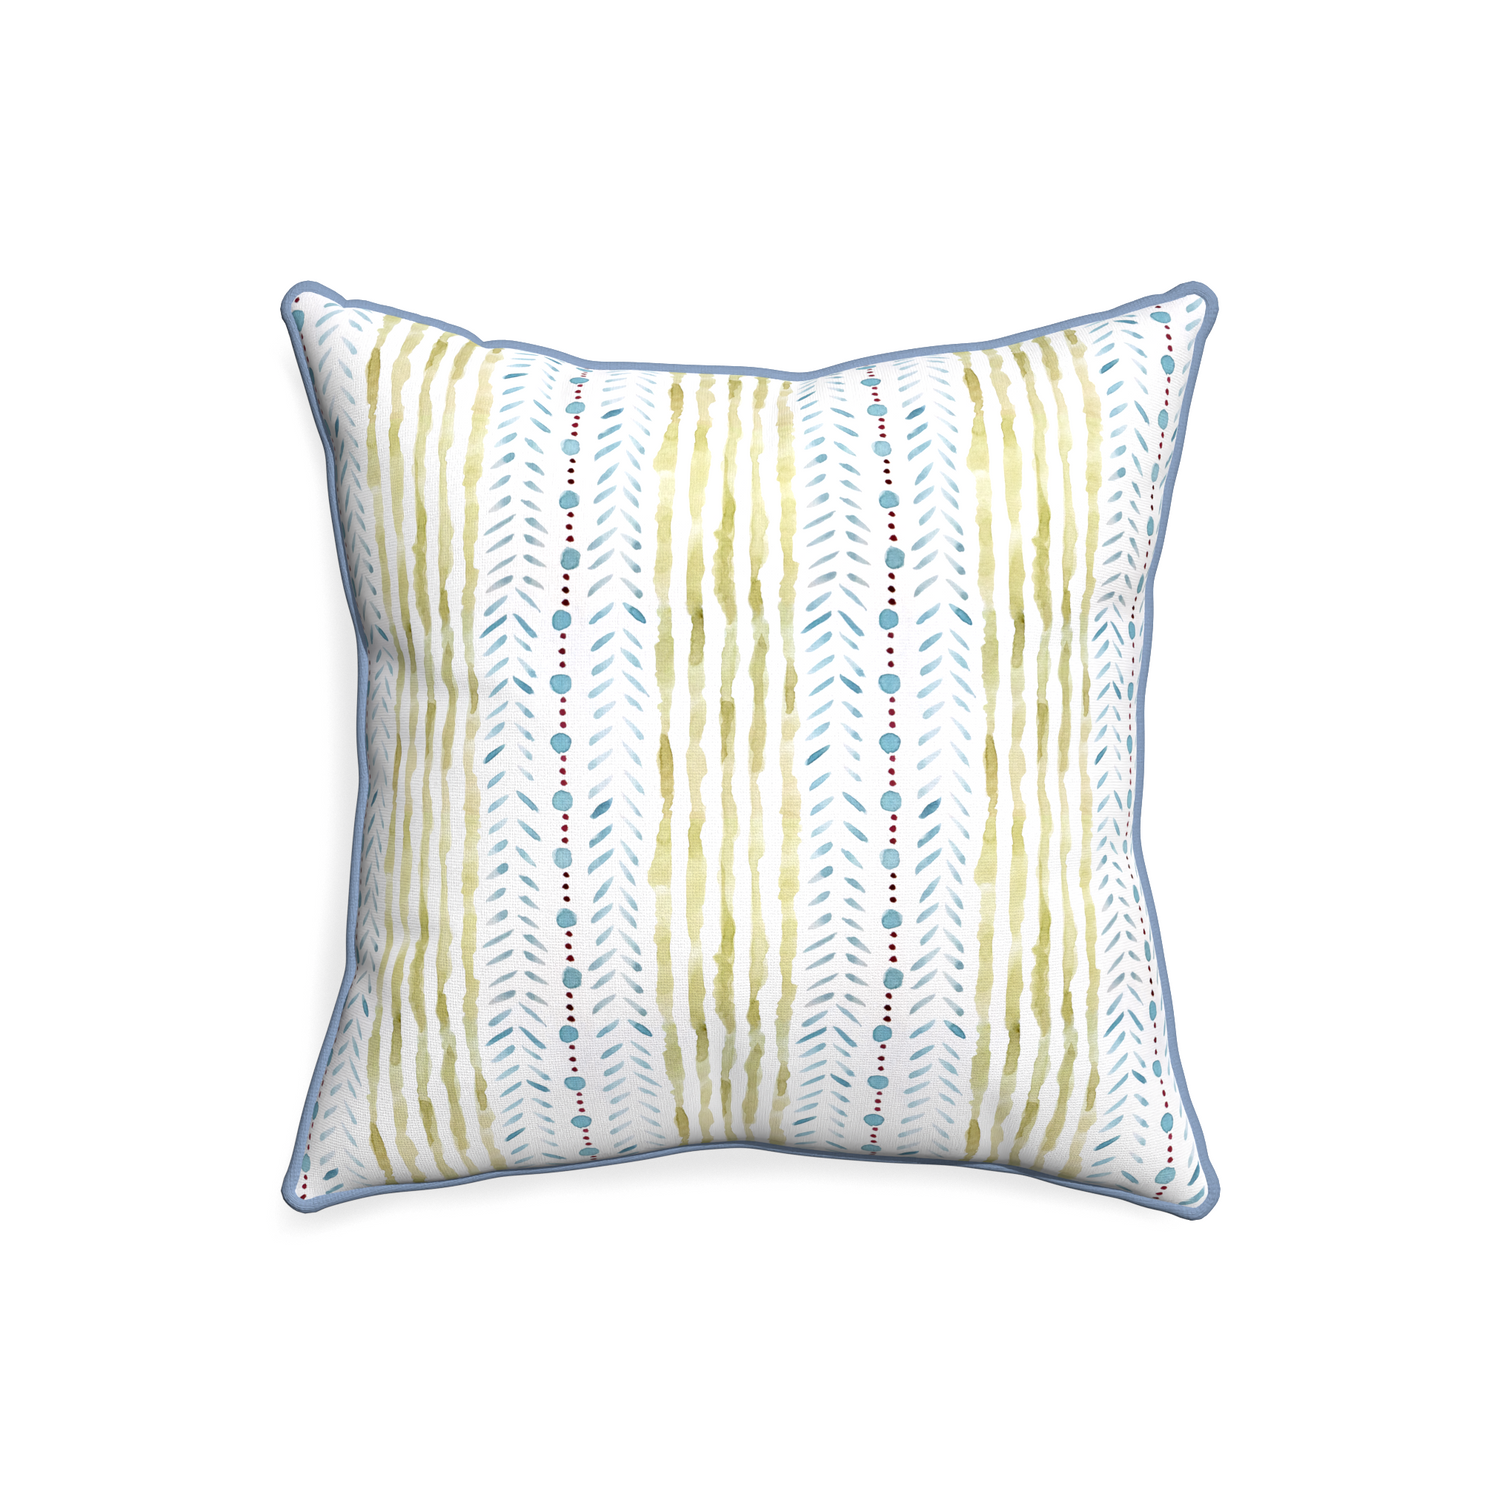 20-square julia custom blue & green stripedpillow with sky piping on white background